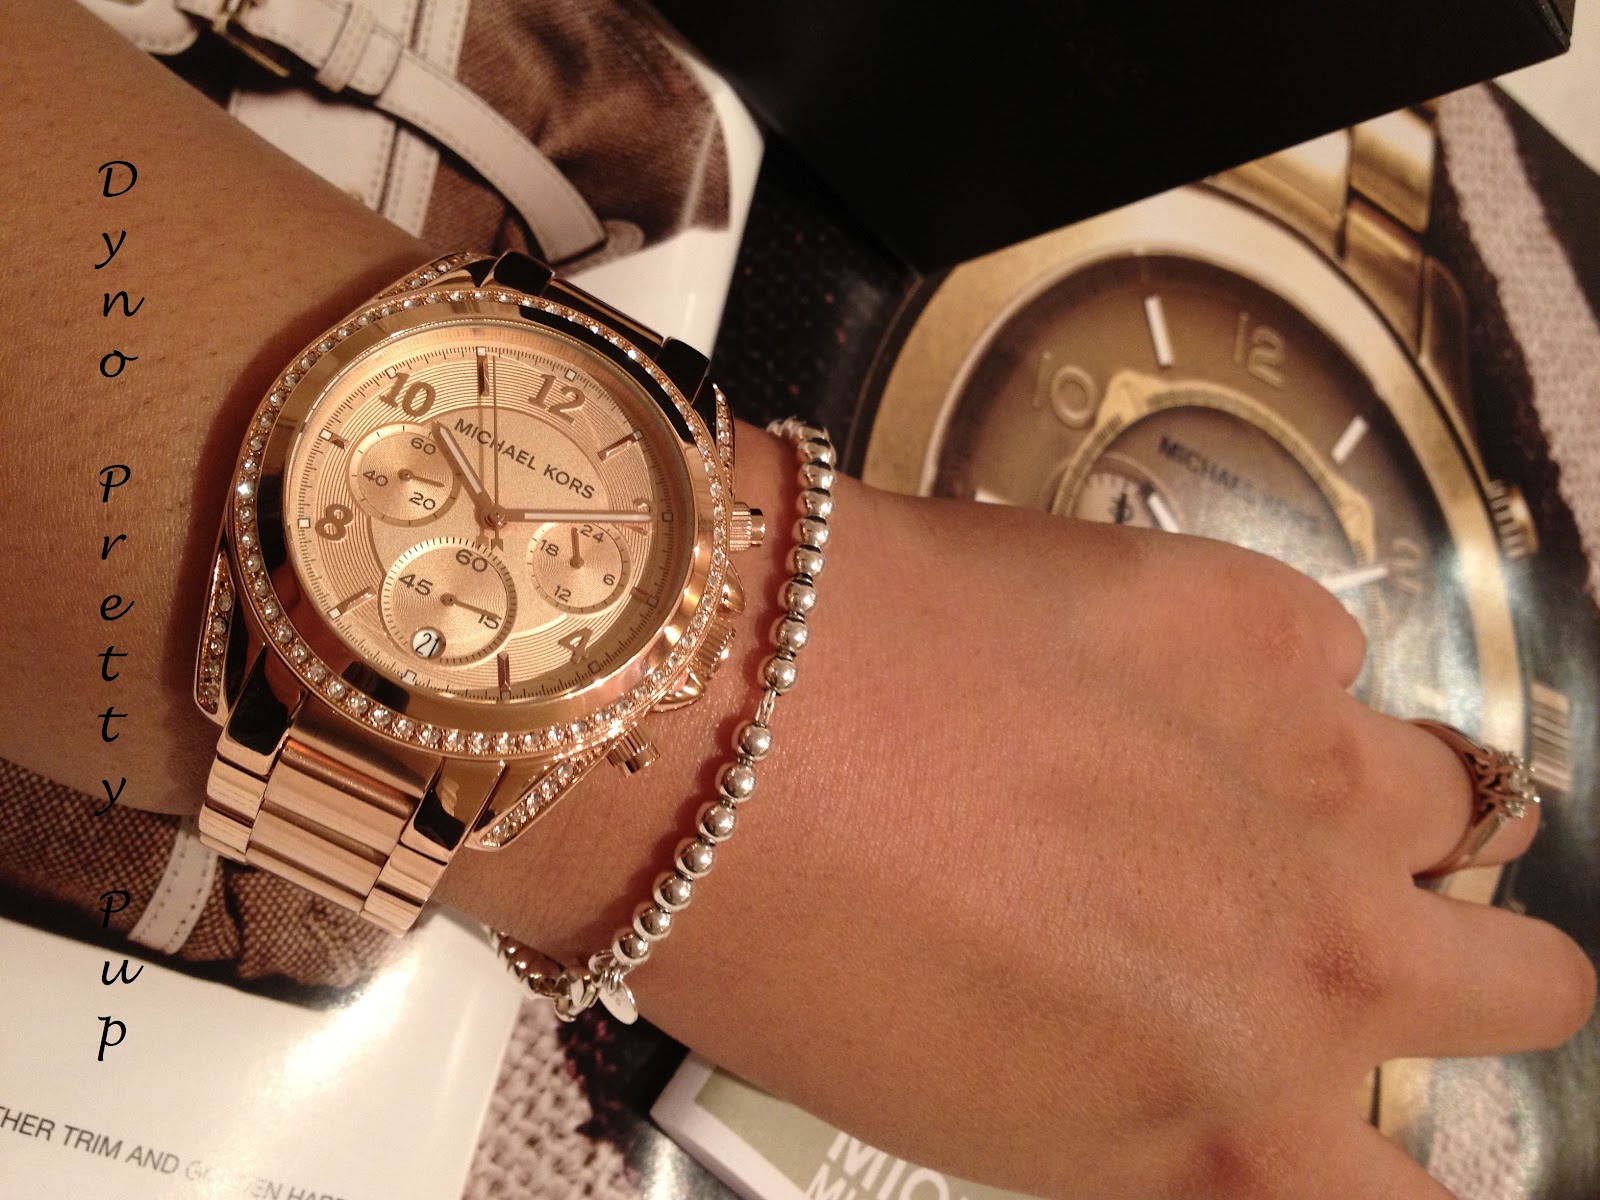 ... beautiful watches and adding them to my jewellery watch collection